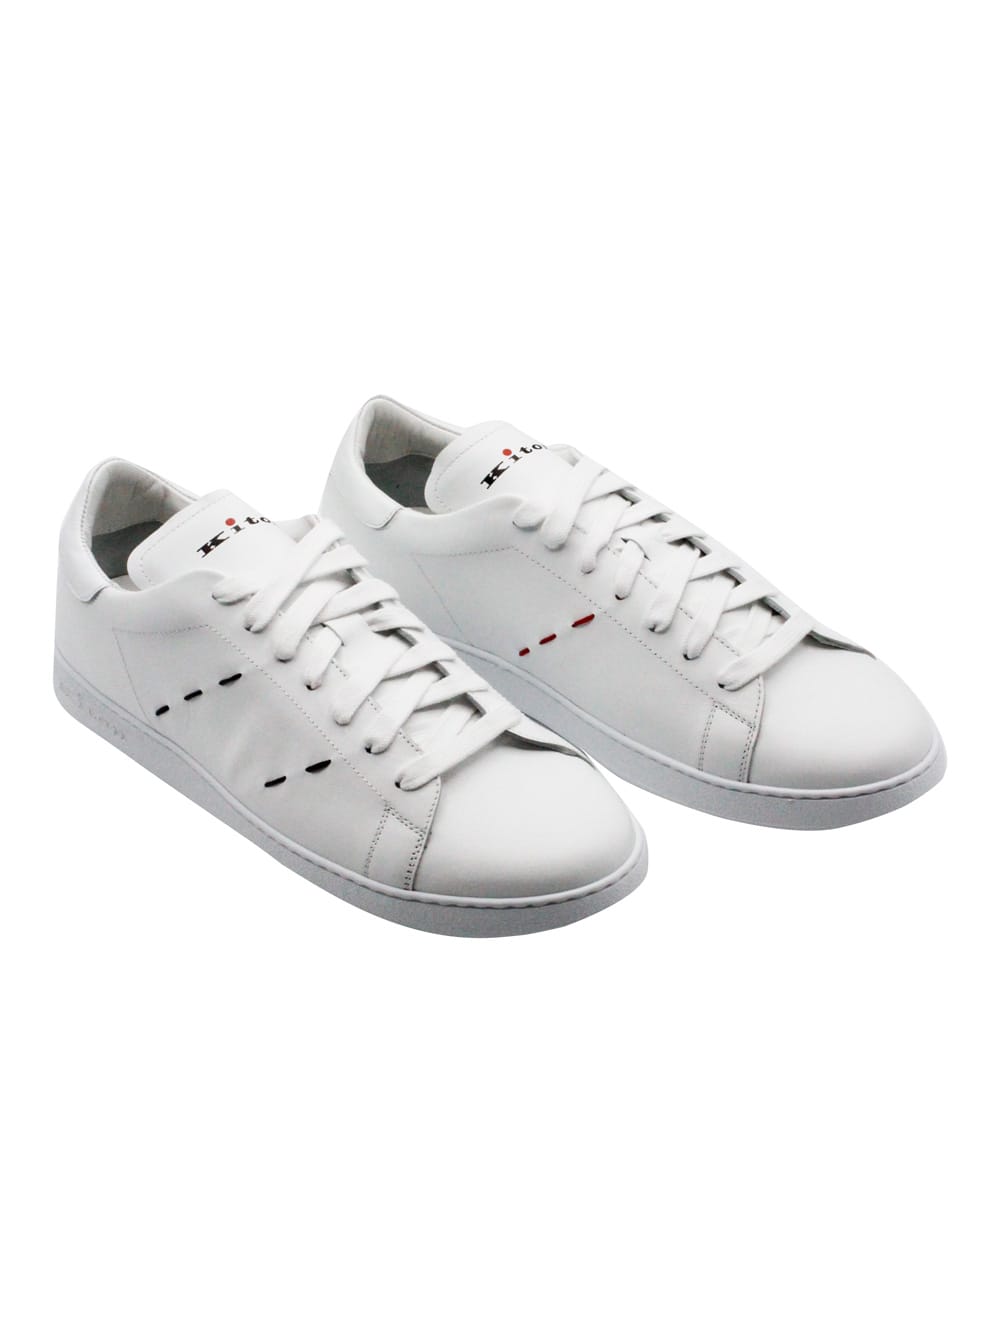 Shop Kiton Lightweight Sneaker Shoe In Soft Leather With Contrasting Color Finishes And Stitching. Tongue With  In White